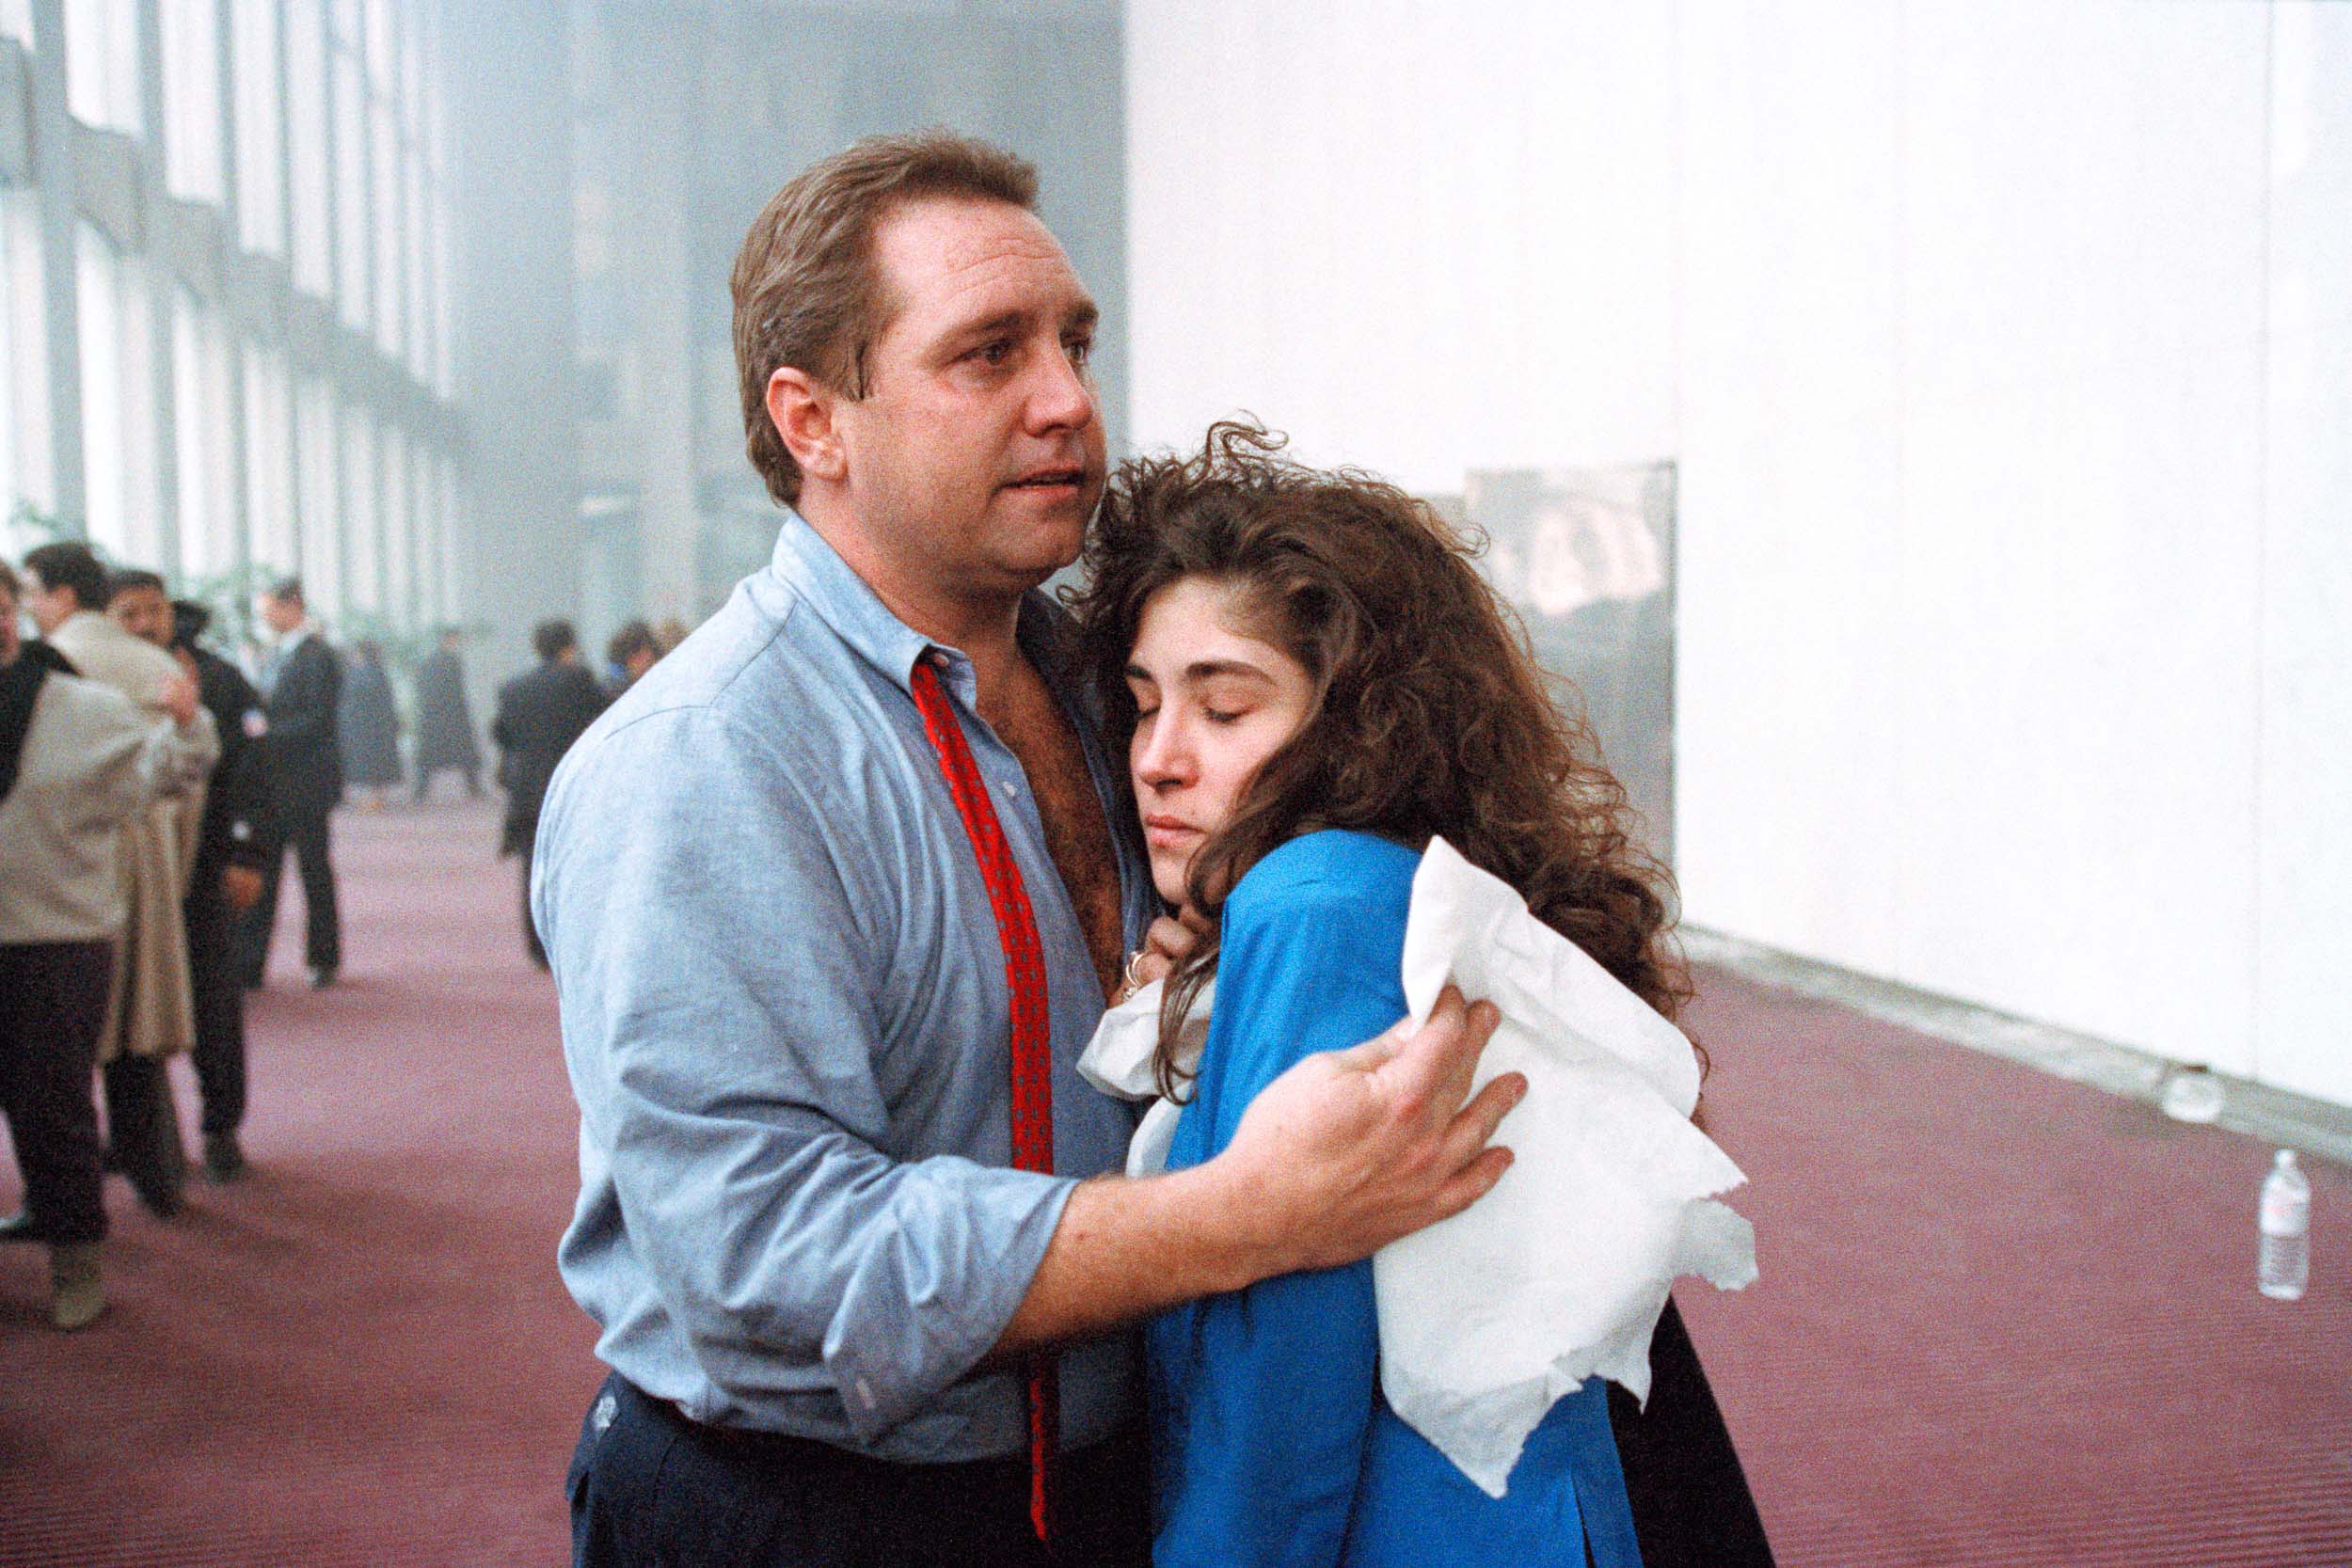 Office workers reuniting with relief  in the lobby of the World Trade Center, NY, 1993